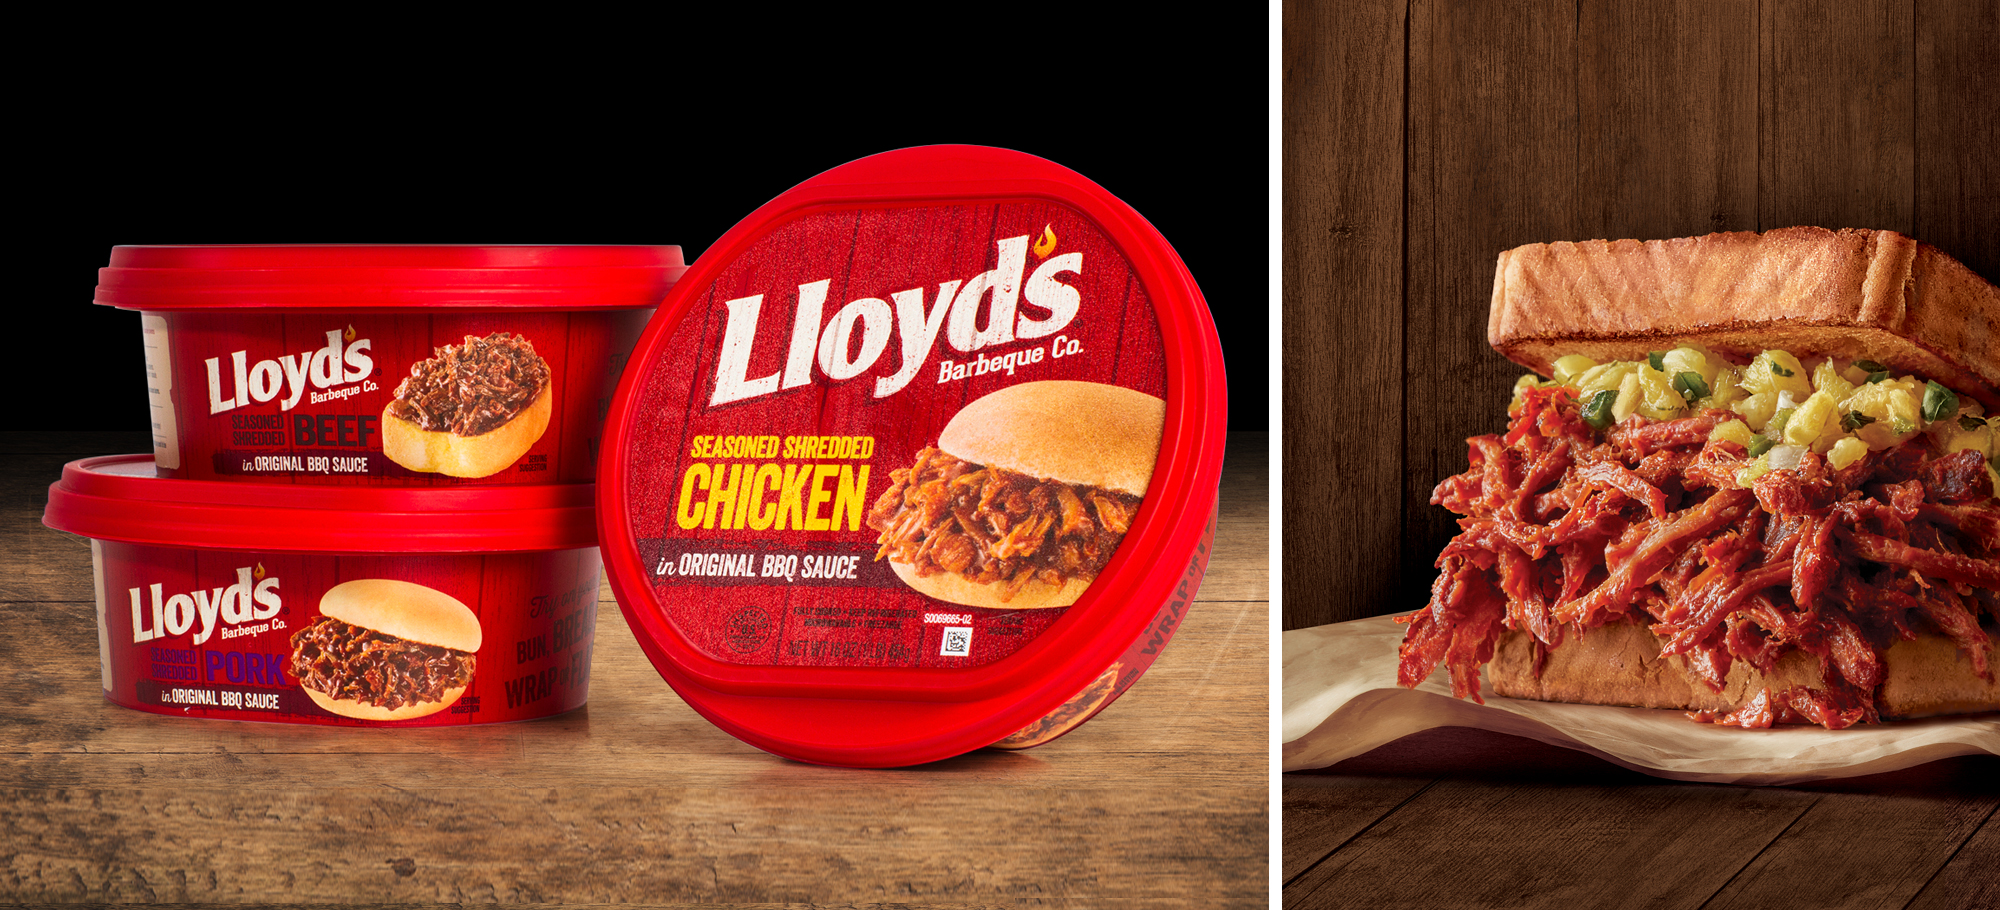 Lloyd's Pulled Pork Tub Package Design & Photography